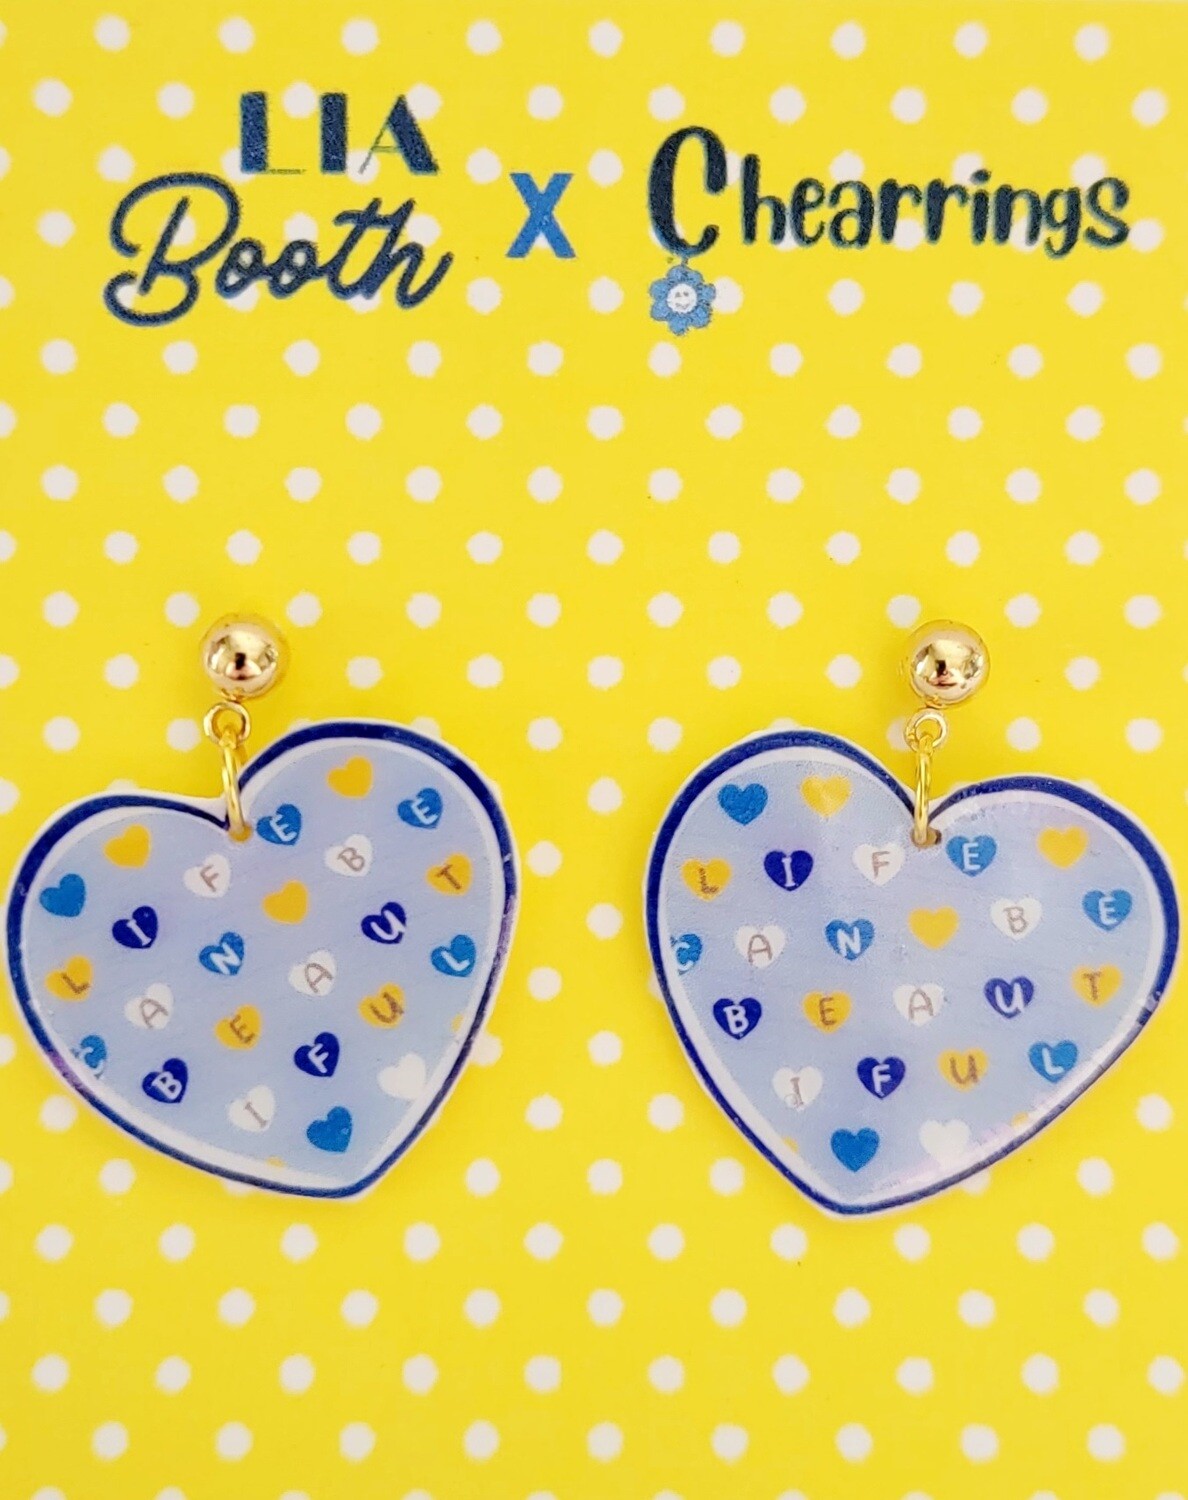 Life Can Be Beautiful earrings by Chearrings